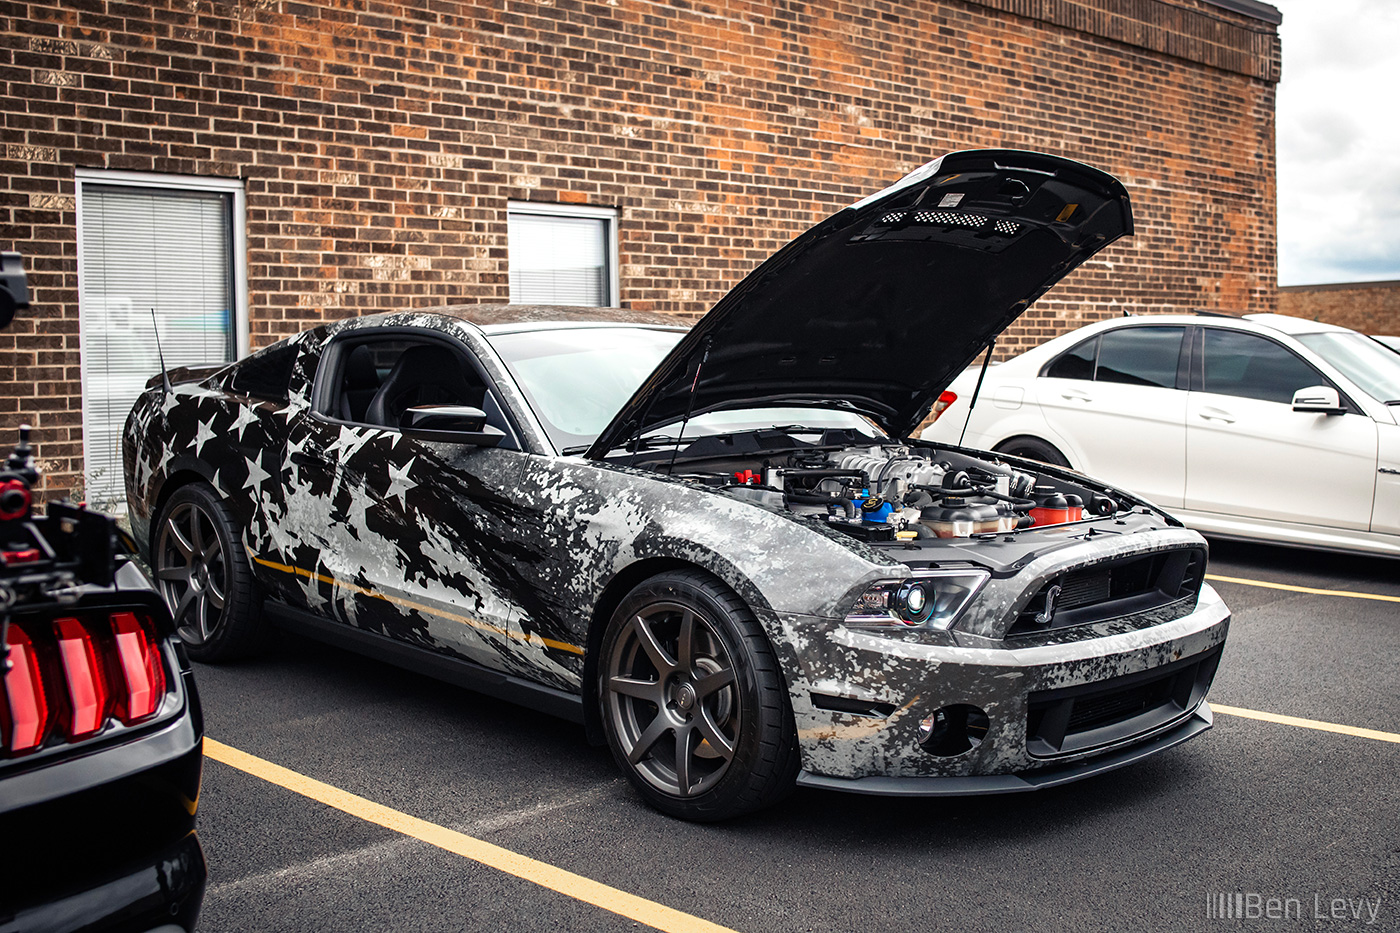 American Flag Wrap on Shelby Mustang